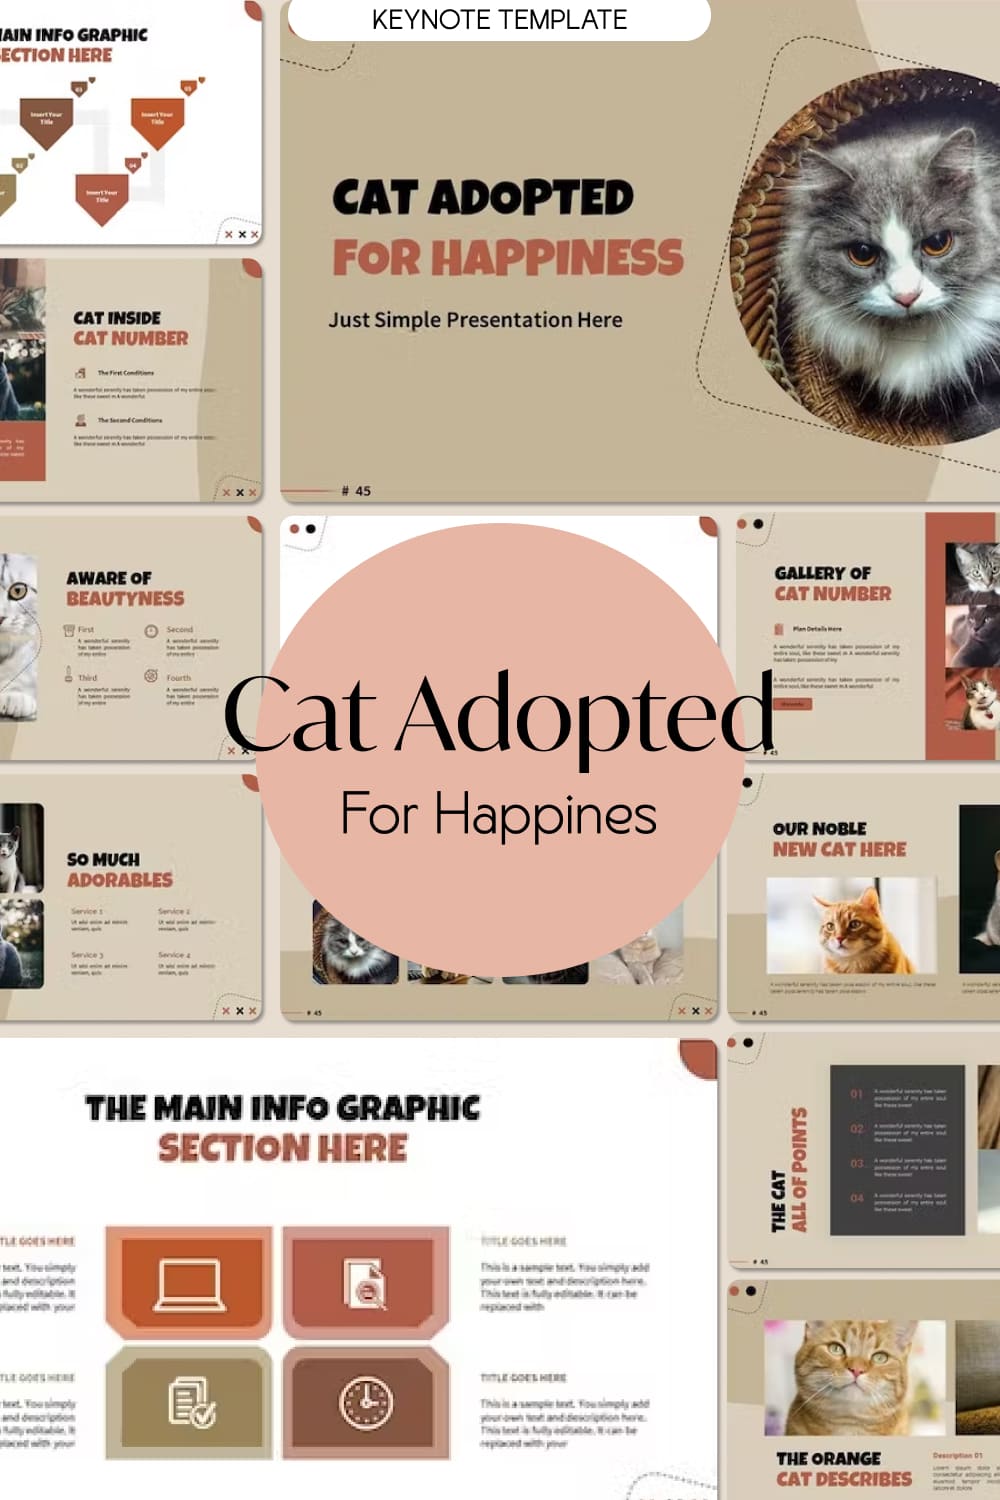 Cat Adopted For Happiness | Keynote Template - Pinterest.